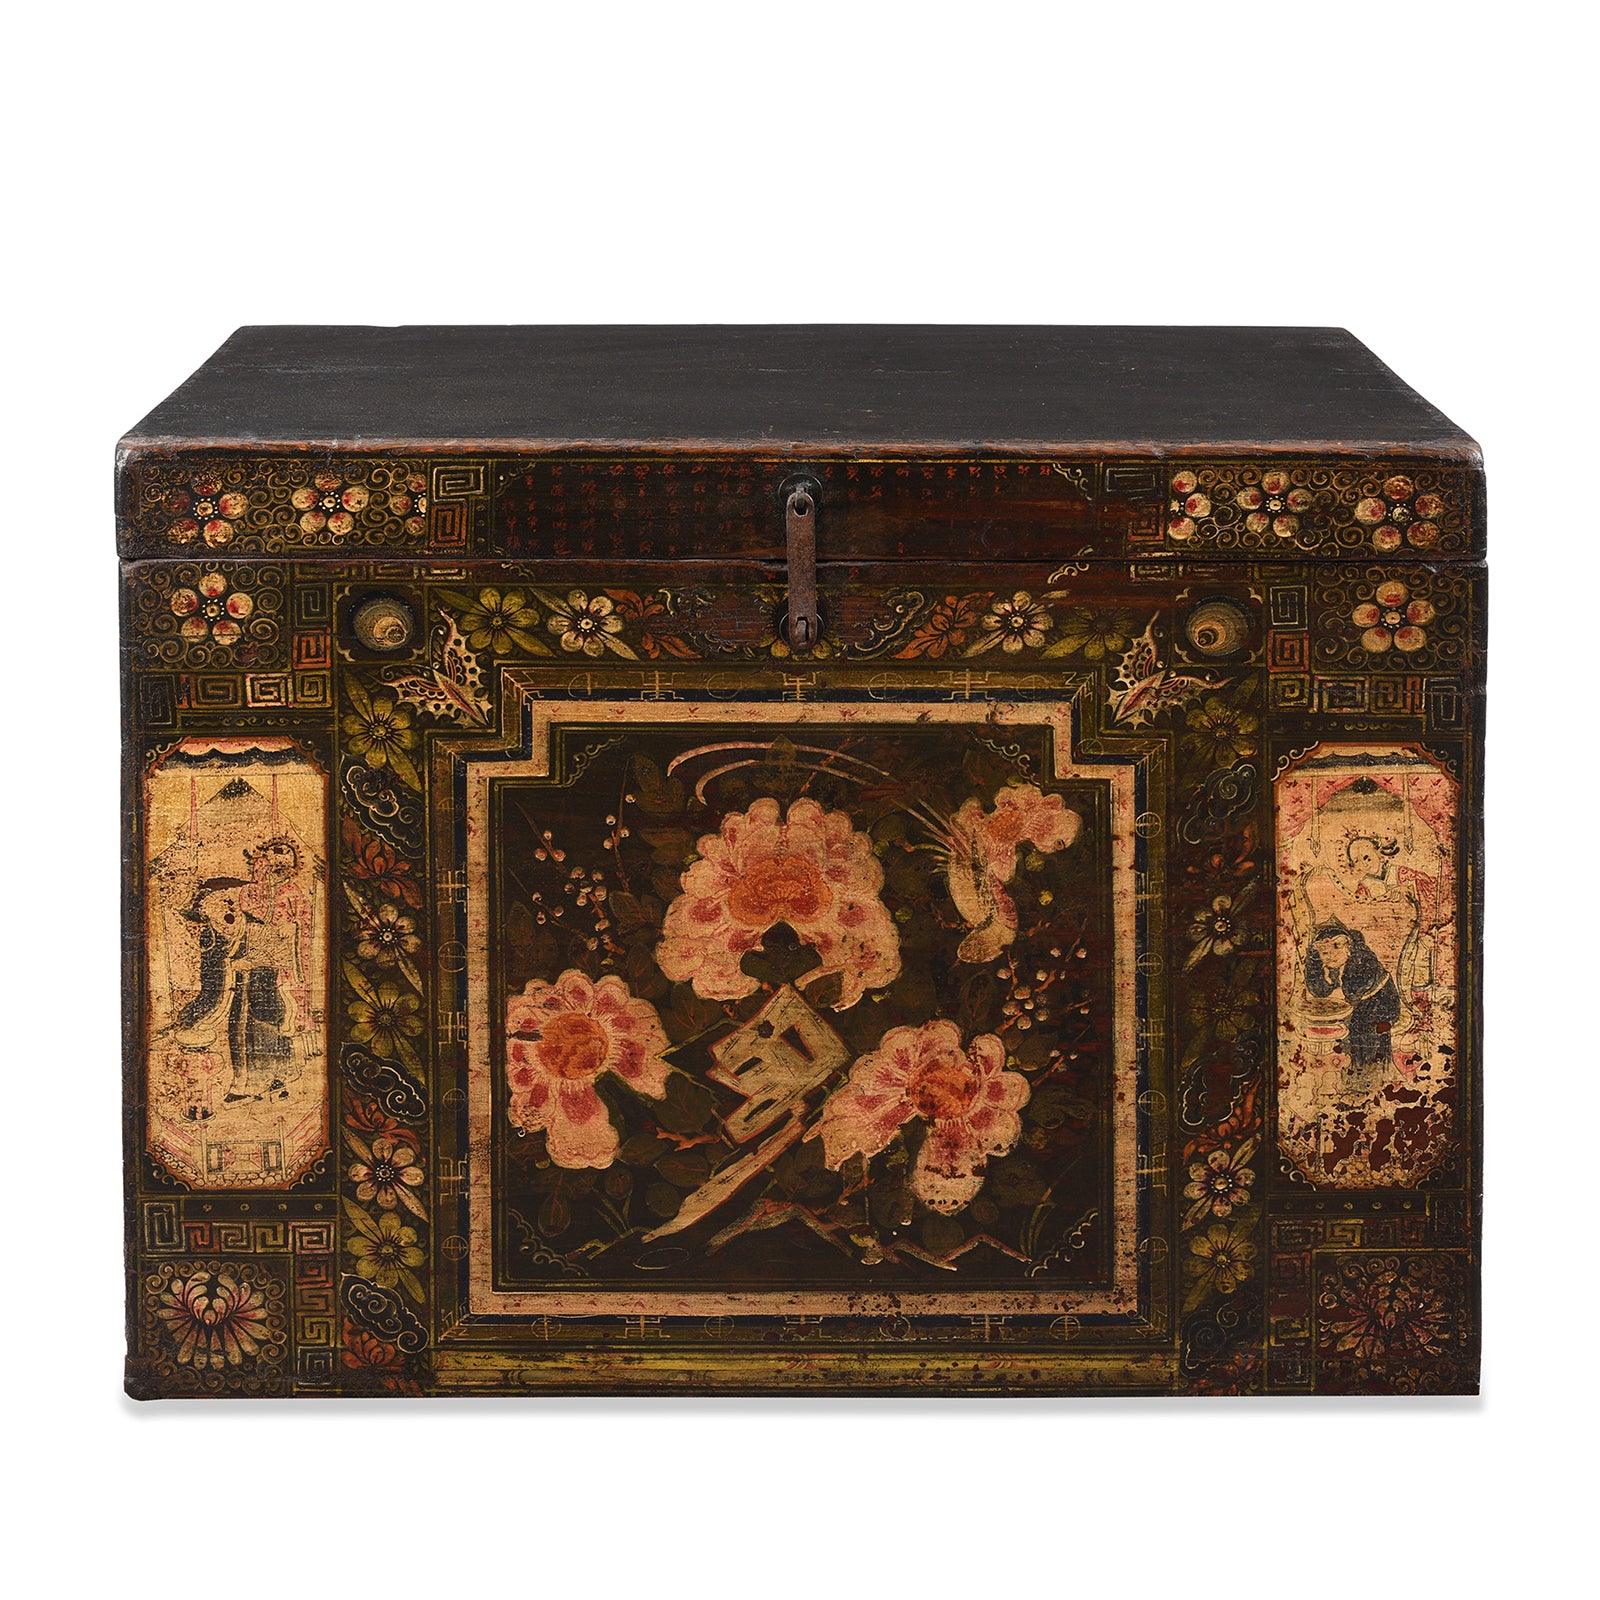 Antique Chinese Opera Chest From Shanxi | Indigo Antiques